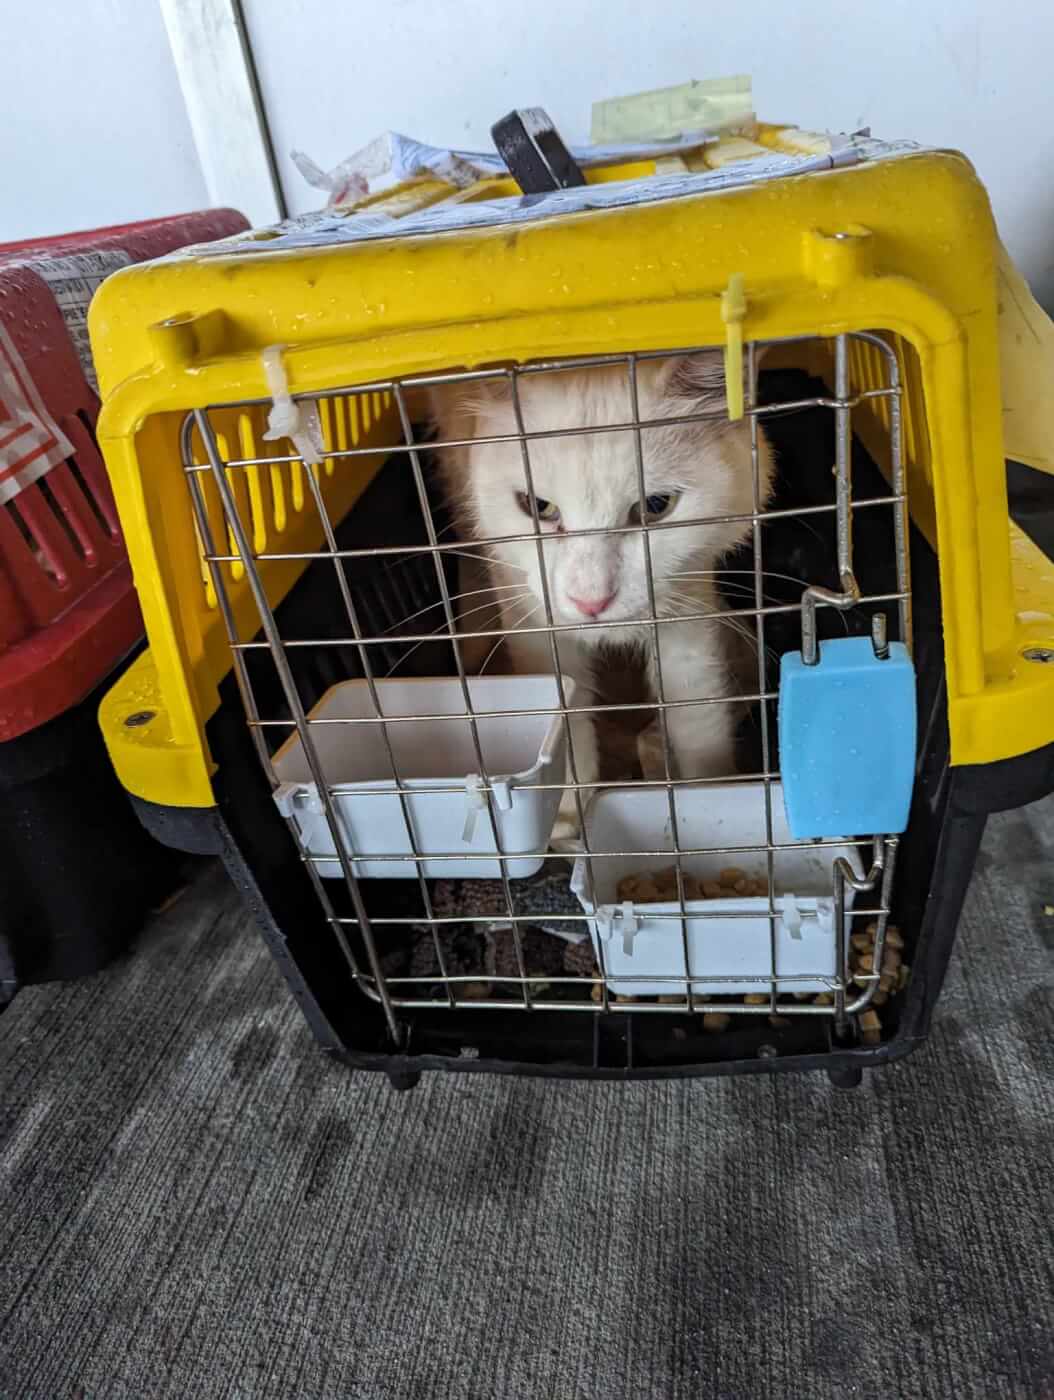 White cat in a zip tied yellow crate